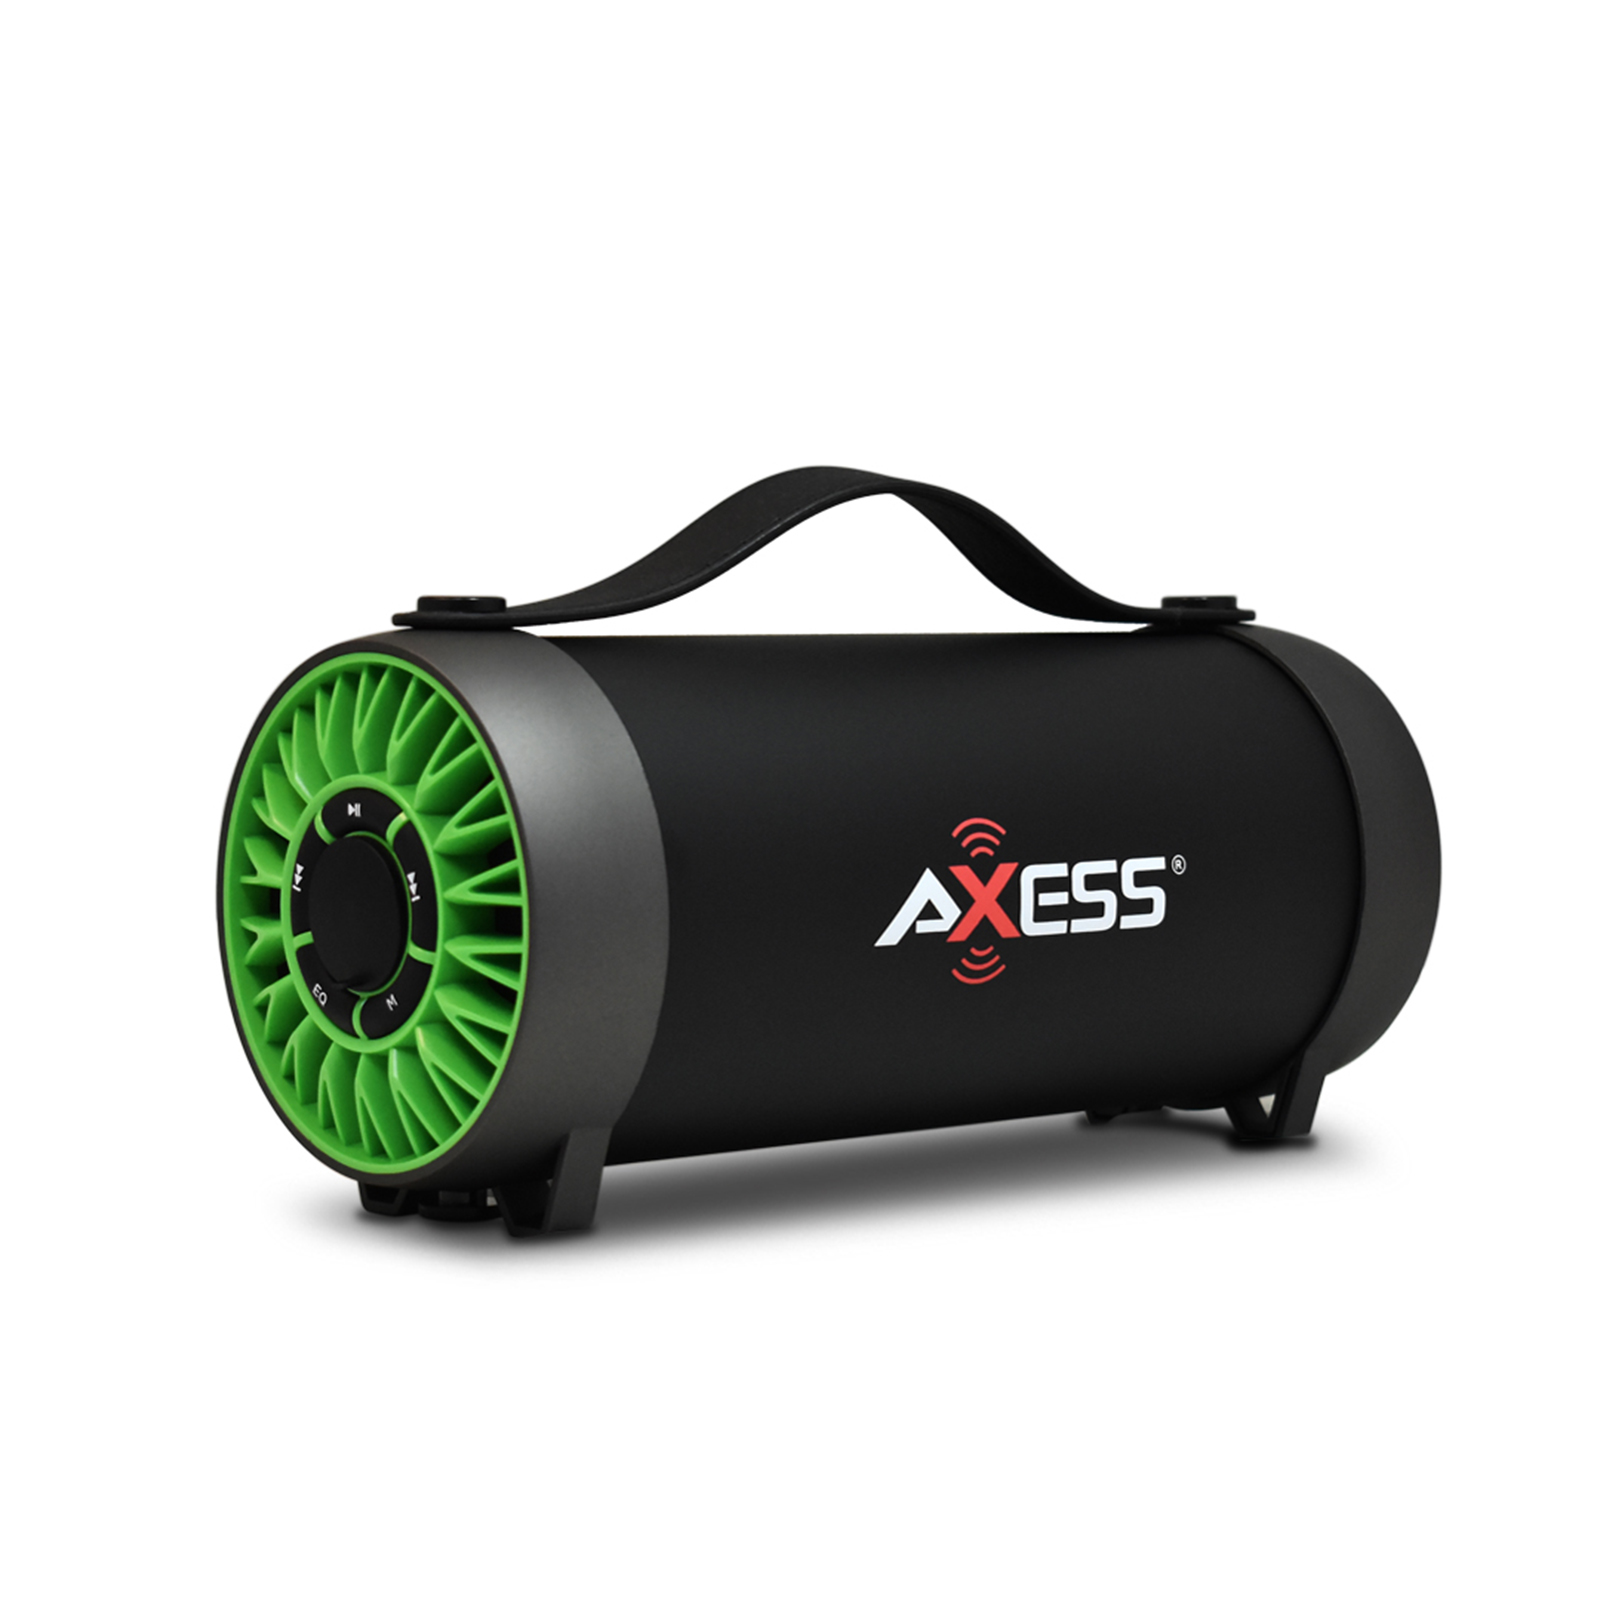 Axess 970109525M Bluetooth Media Speaker with Equalizer in Green